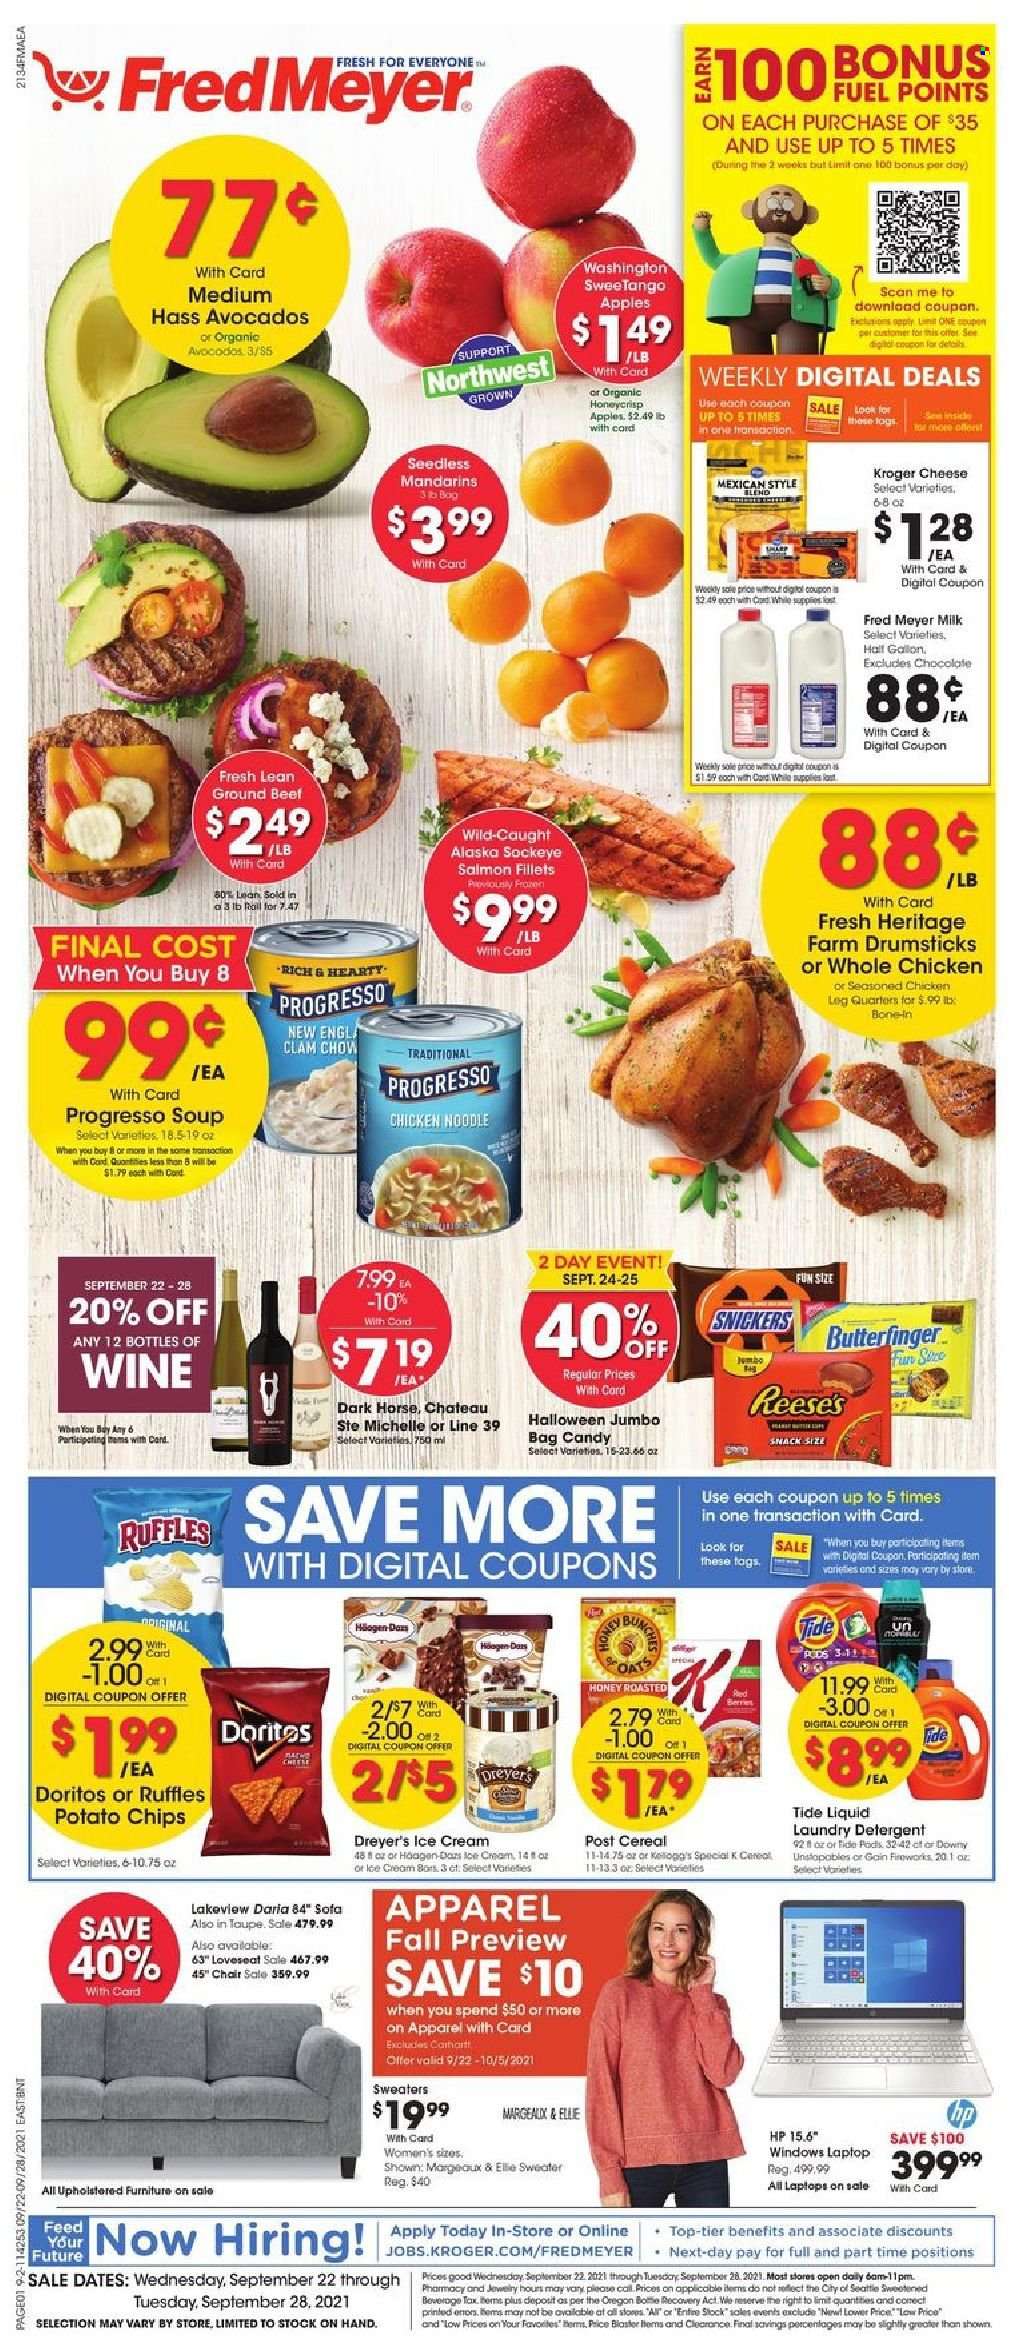 thumbnail - Fred Meyer Flyer - 09/22/2021 - 09/28/2021 - Sales products - Hewlett Packard, avocado, mandarines, clams, salmon, salmon fillet, noodles, Progresso, cheese, milk, ice cream, Reese's, snack, Snickers, Doritos, potato chips, chips, Ruffles, cereals, whole chicken, chicken legs, beef meat, ground beef, detergent, Gain, Tide, laundry detergent, laptop. Page 1.